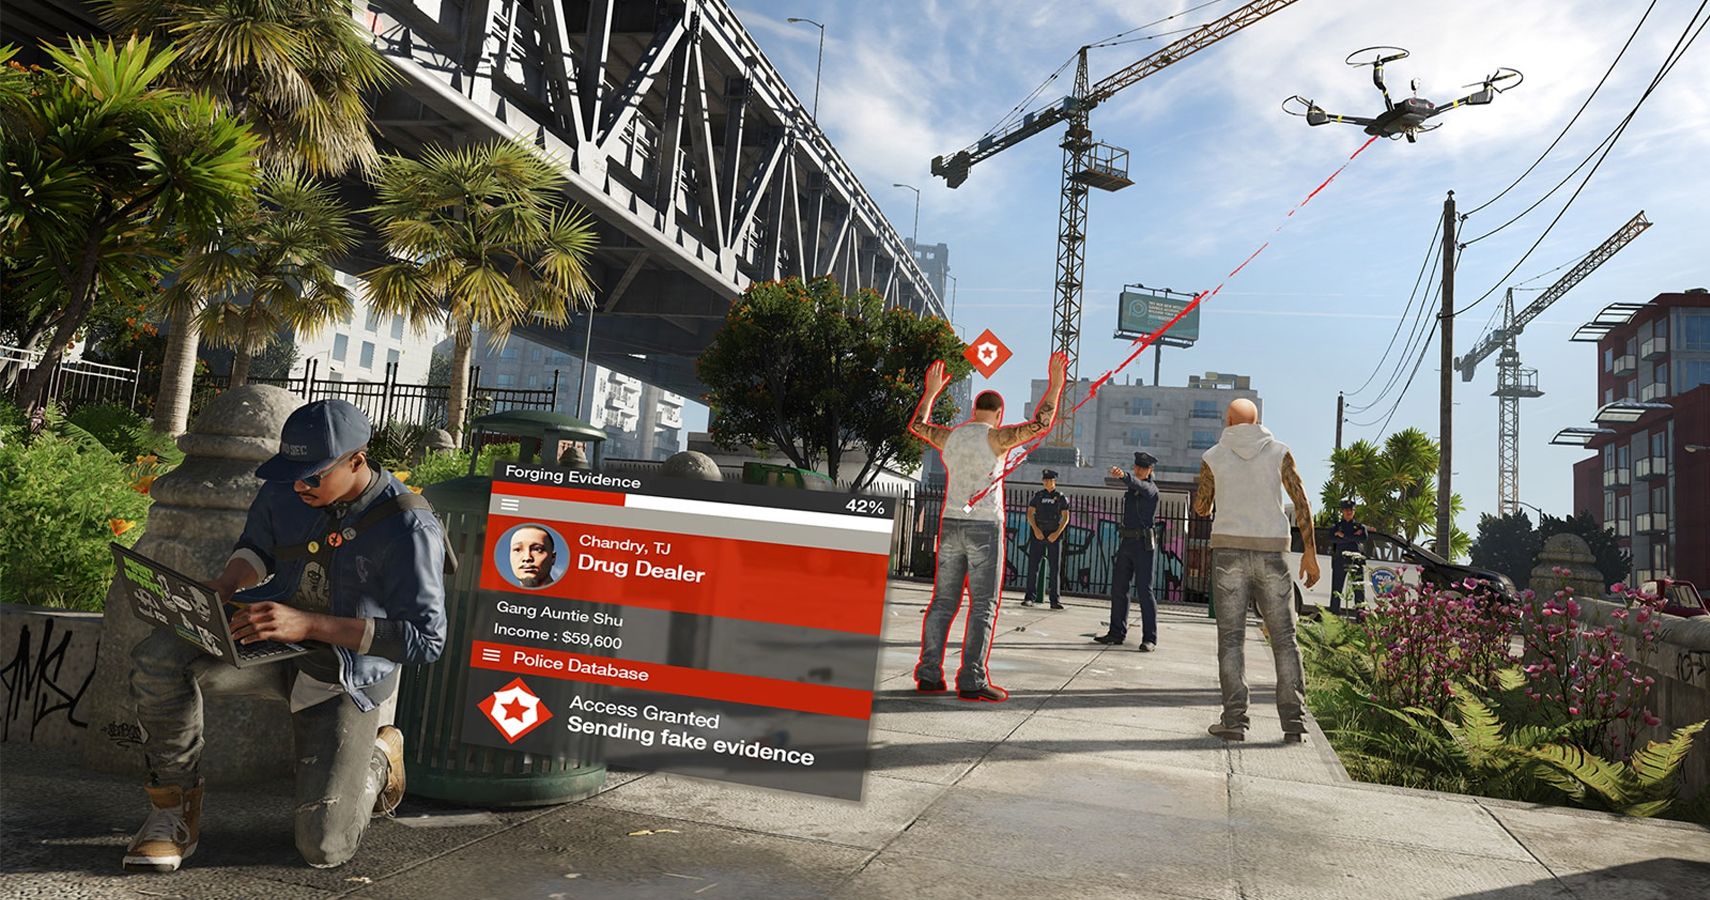 Watch-Dogs-2-Drone-Hacking-Feature-Image